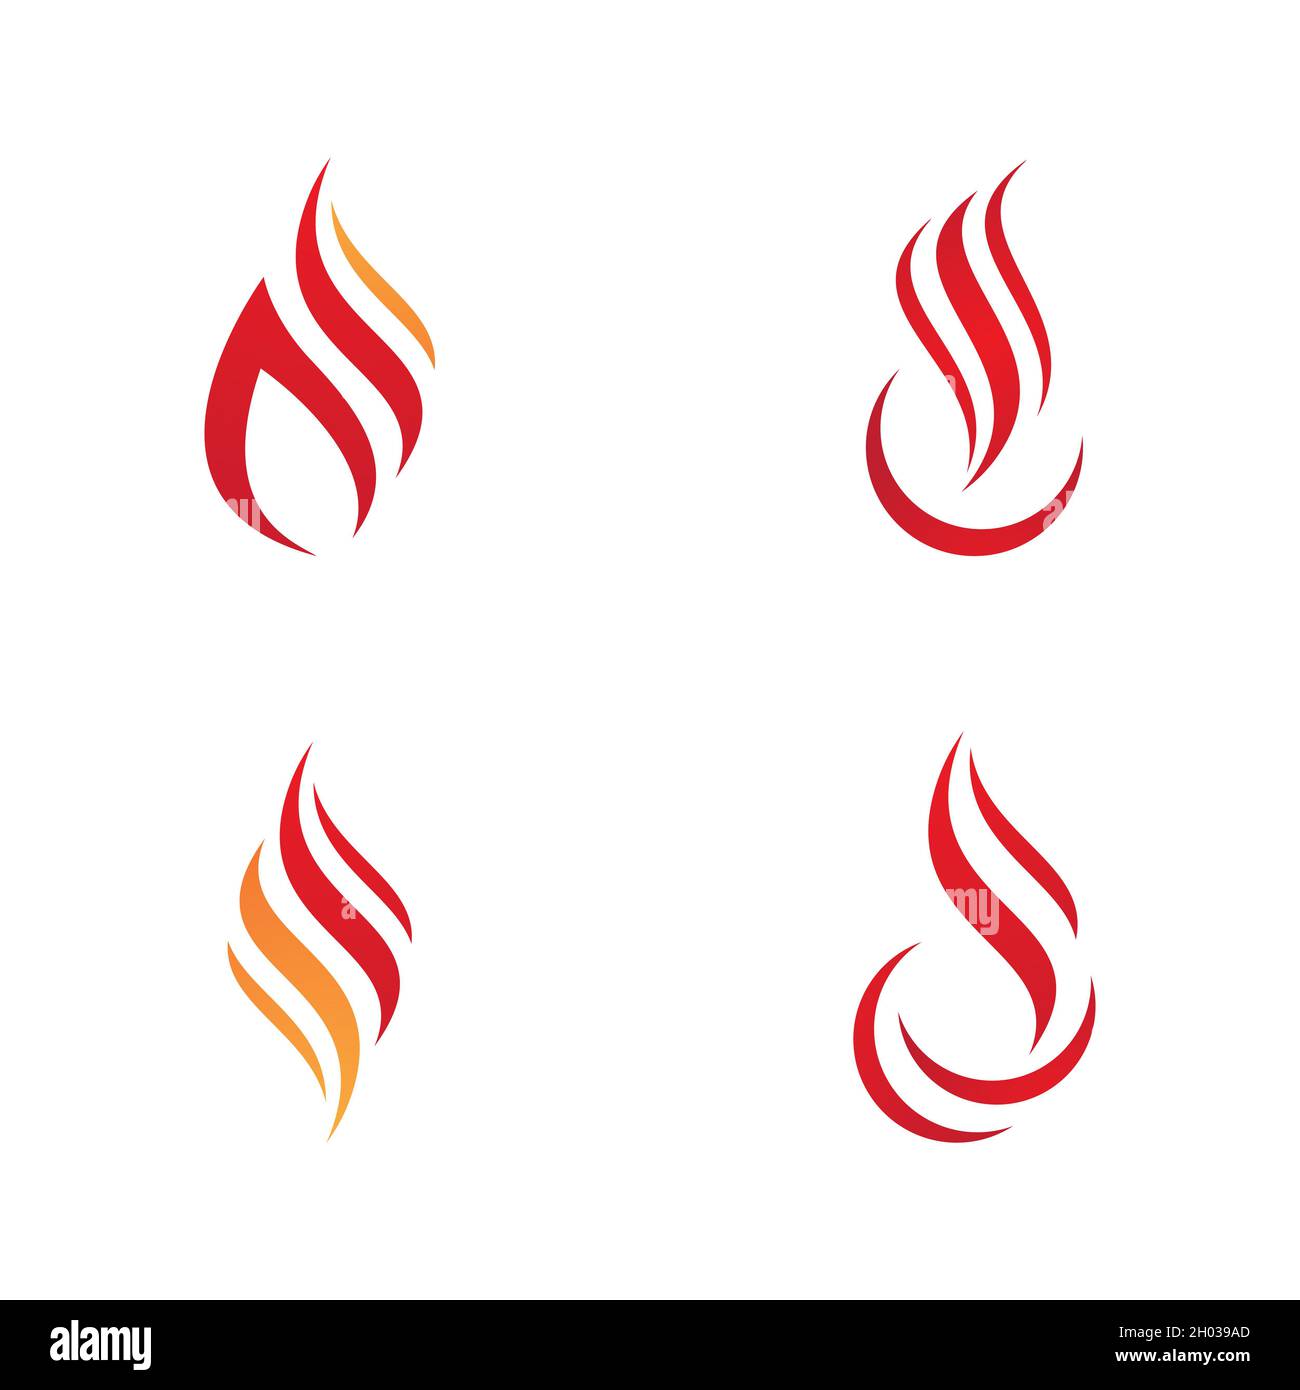 Hot flame fire vector icon illustration design template Stock Photo